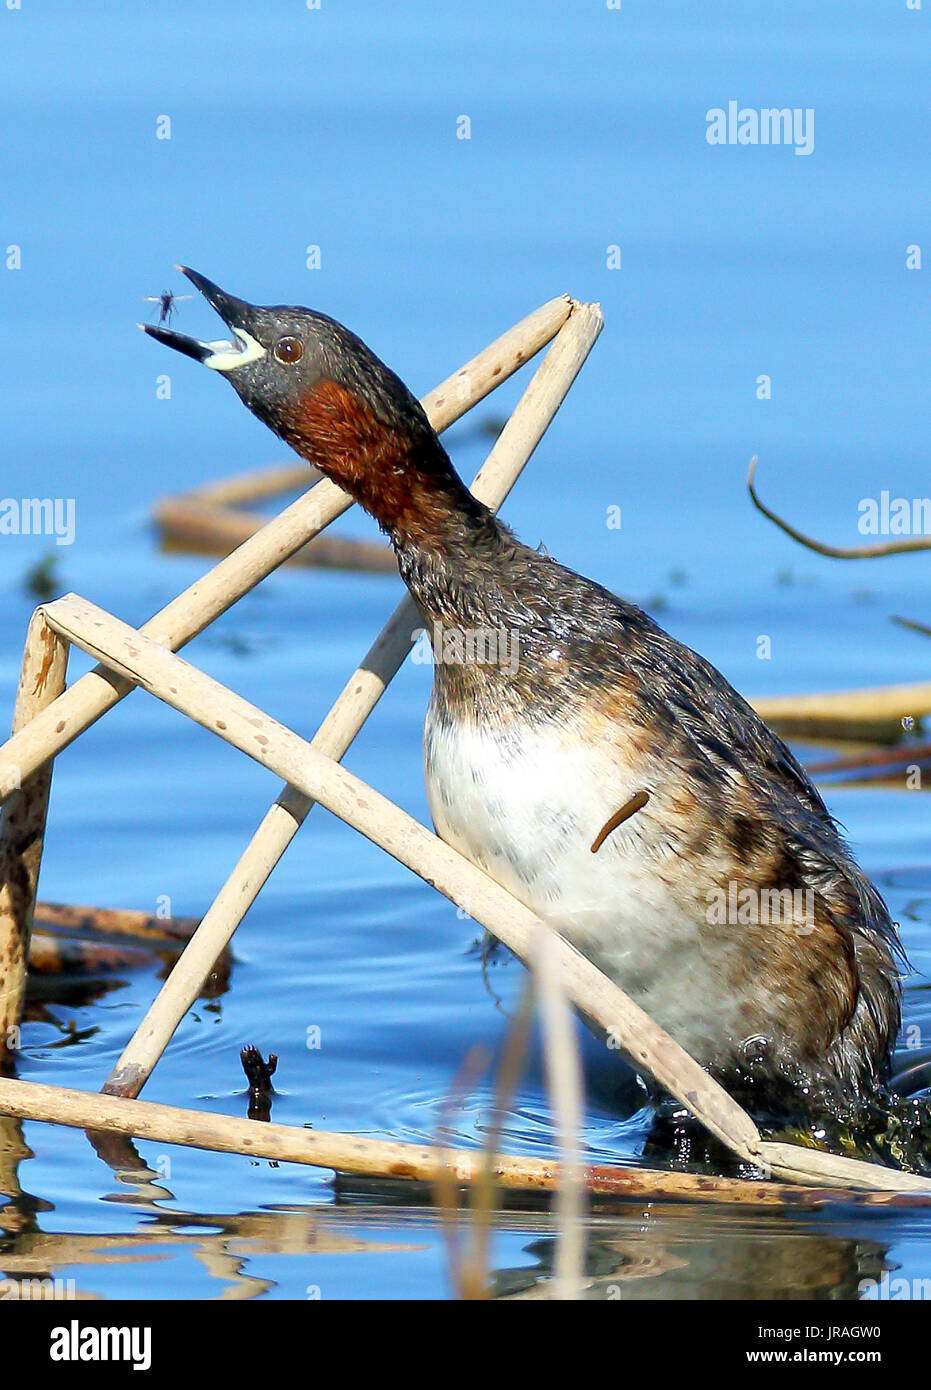 Little Grebe jumping out of water to catch fly in between the reeds,notice the leech clinging to its bodyi Stock Photo